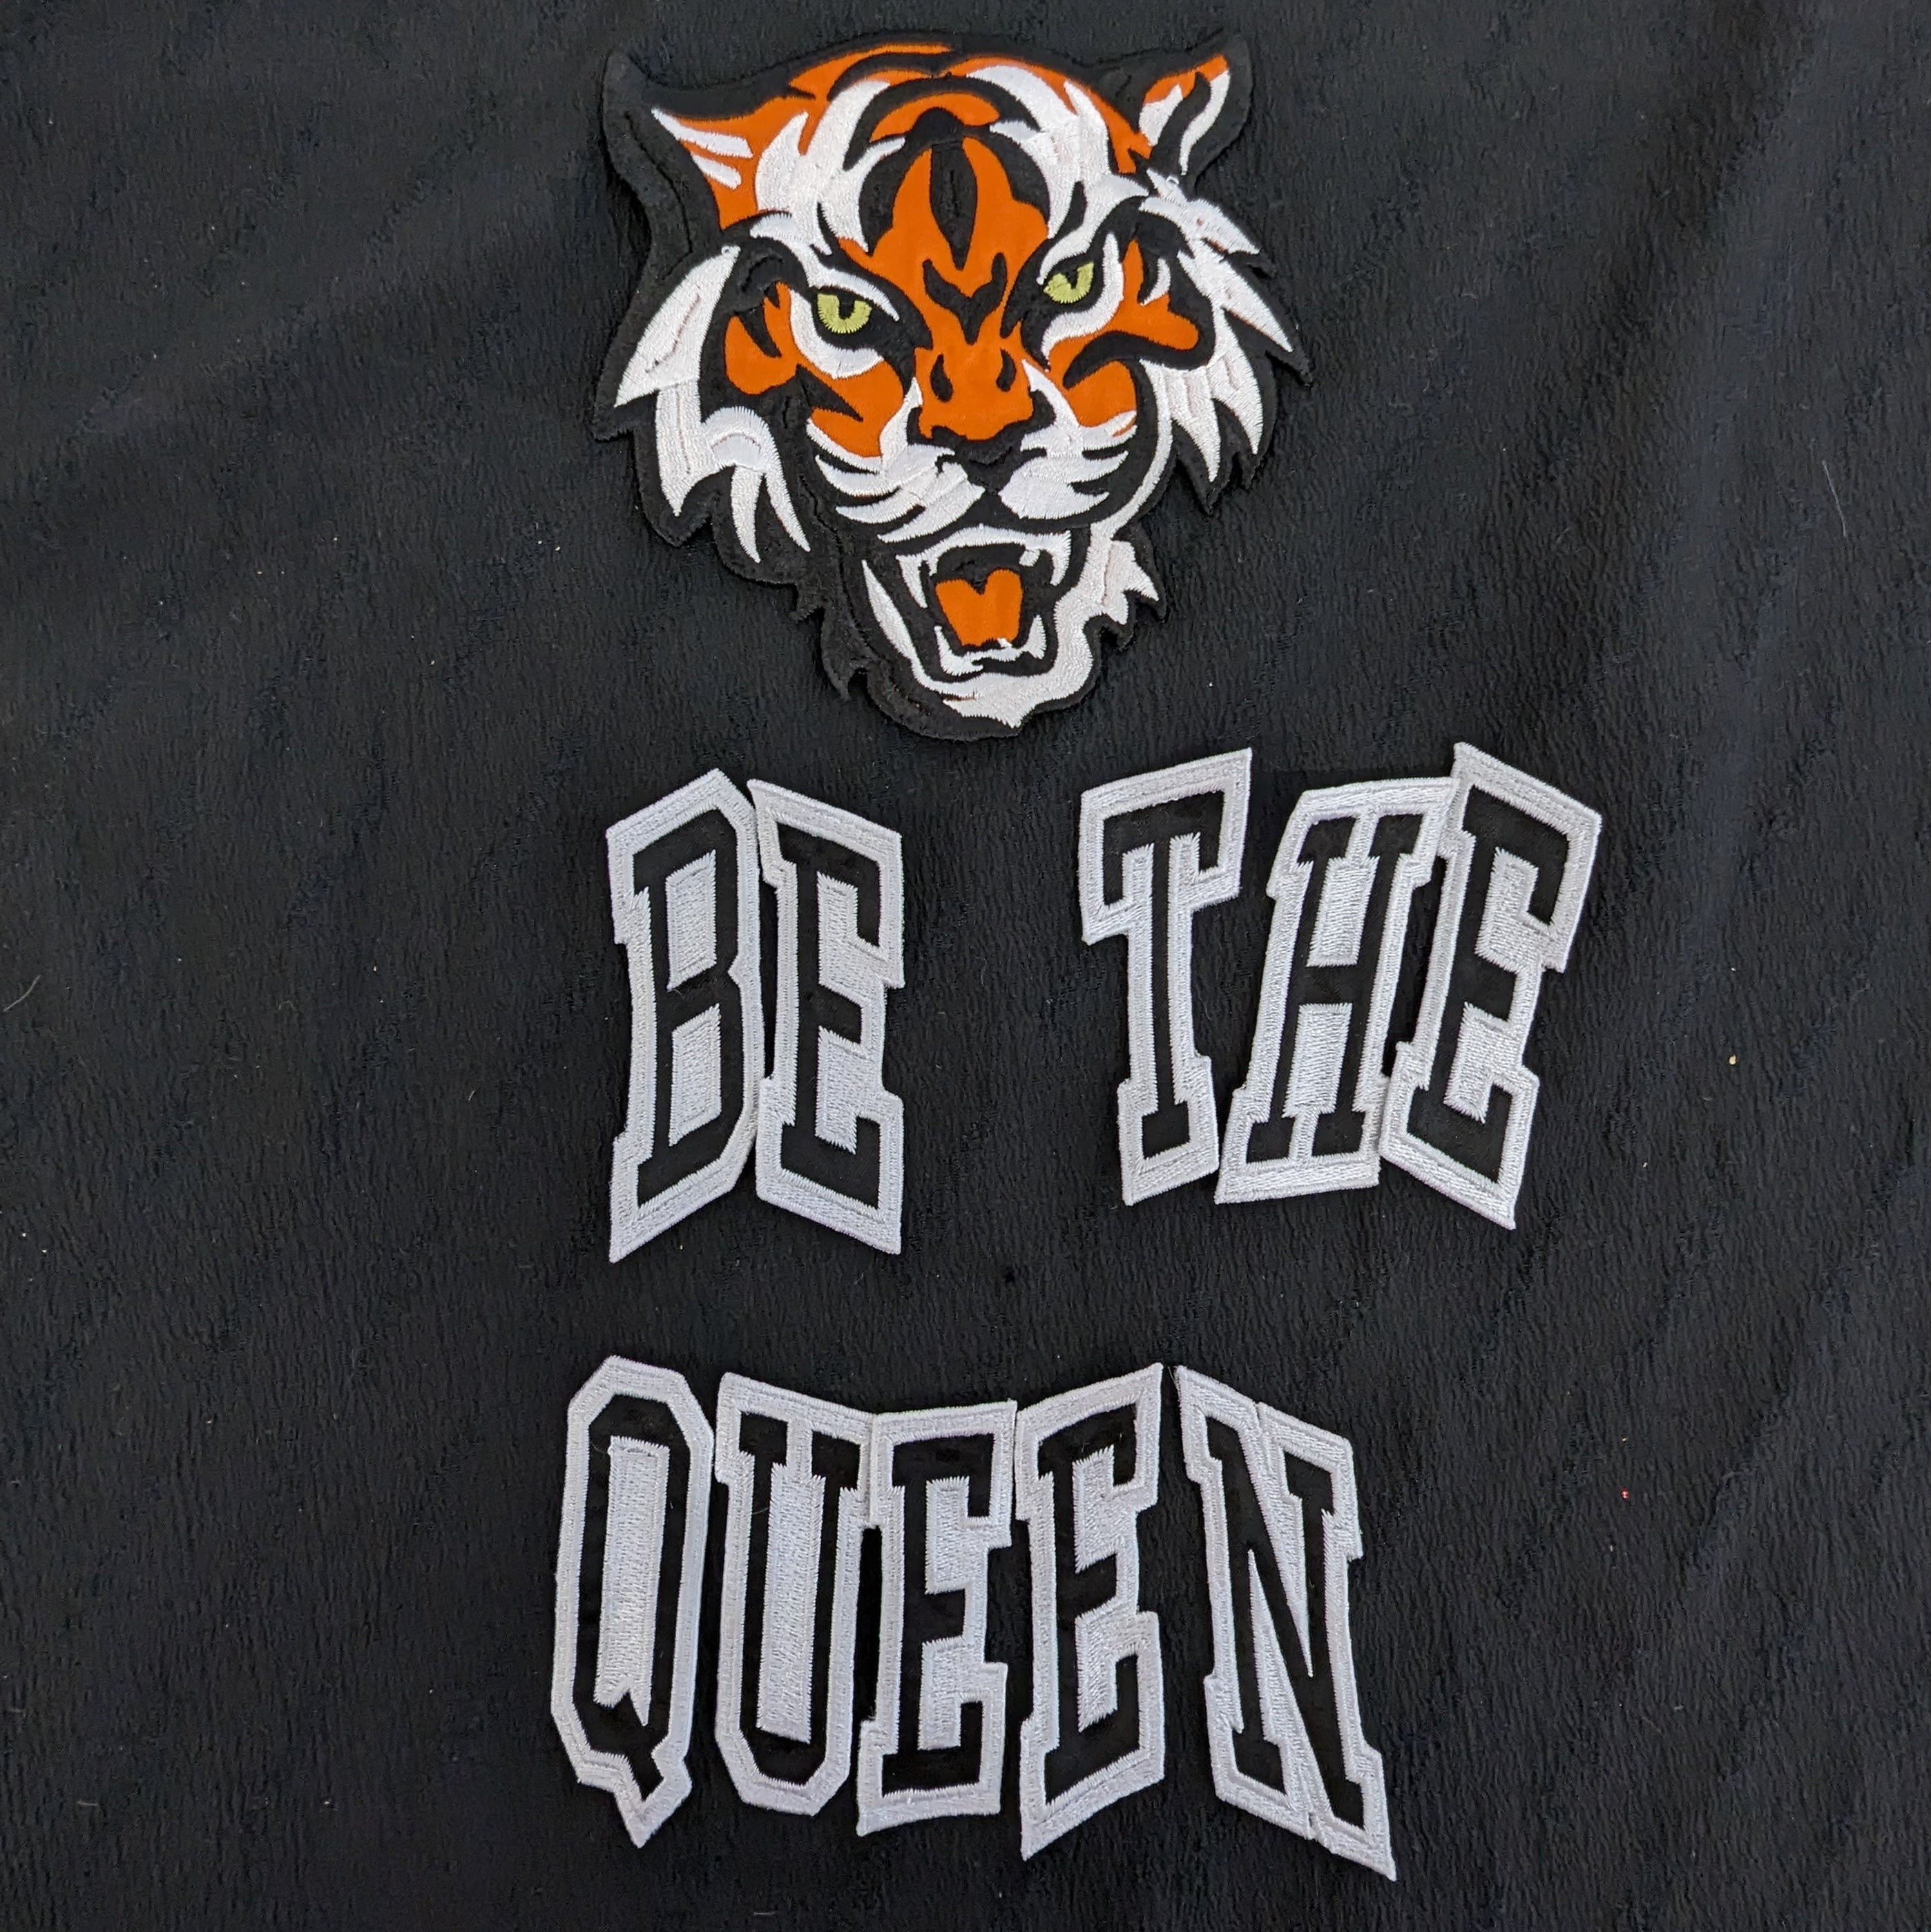 Patch-Set DG Tiger be the queen